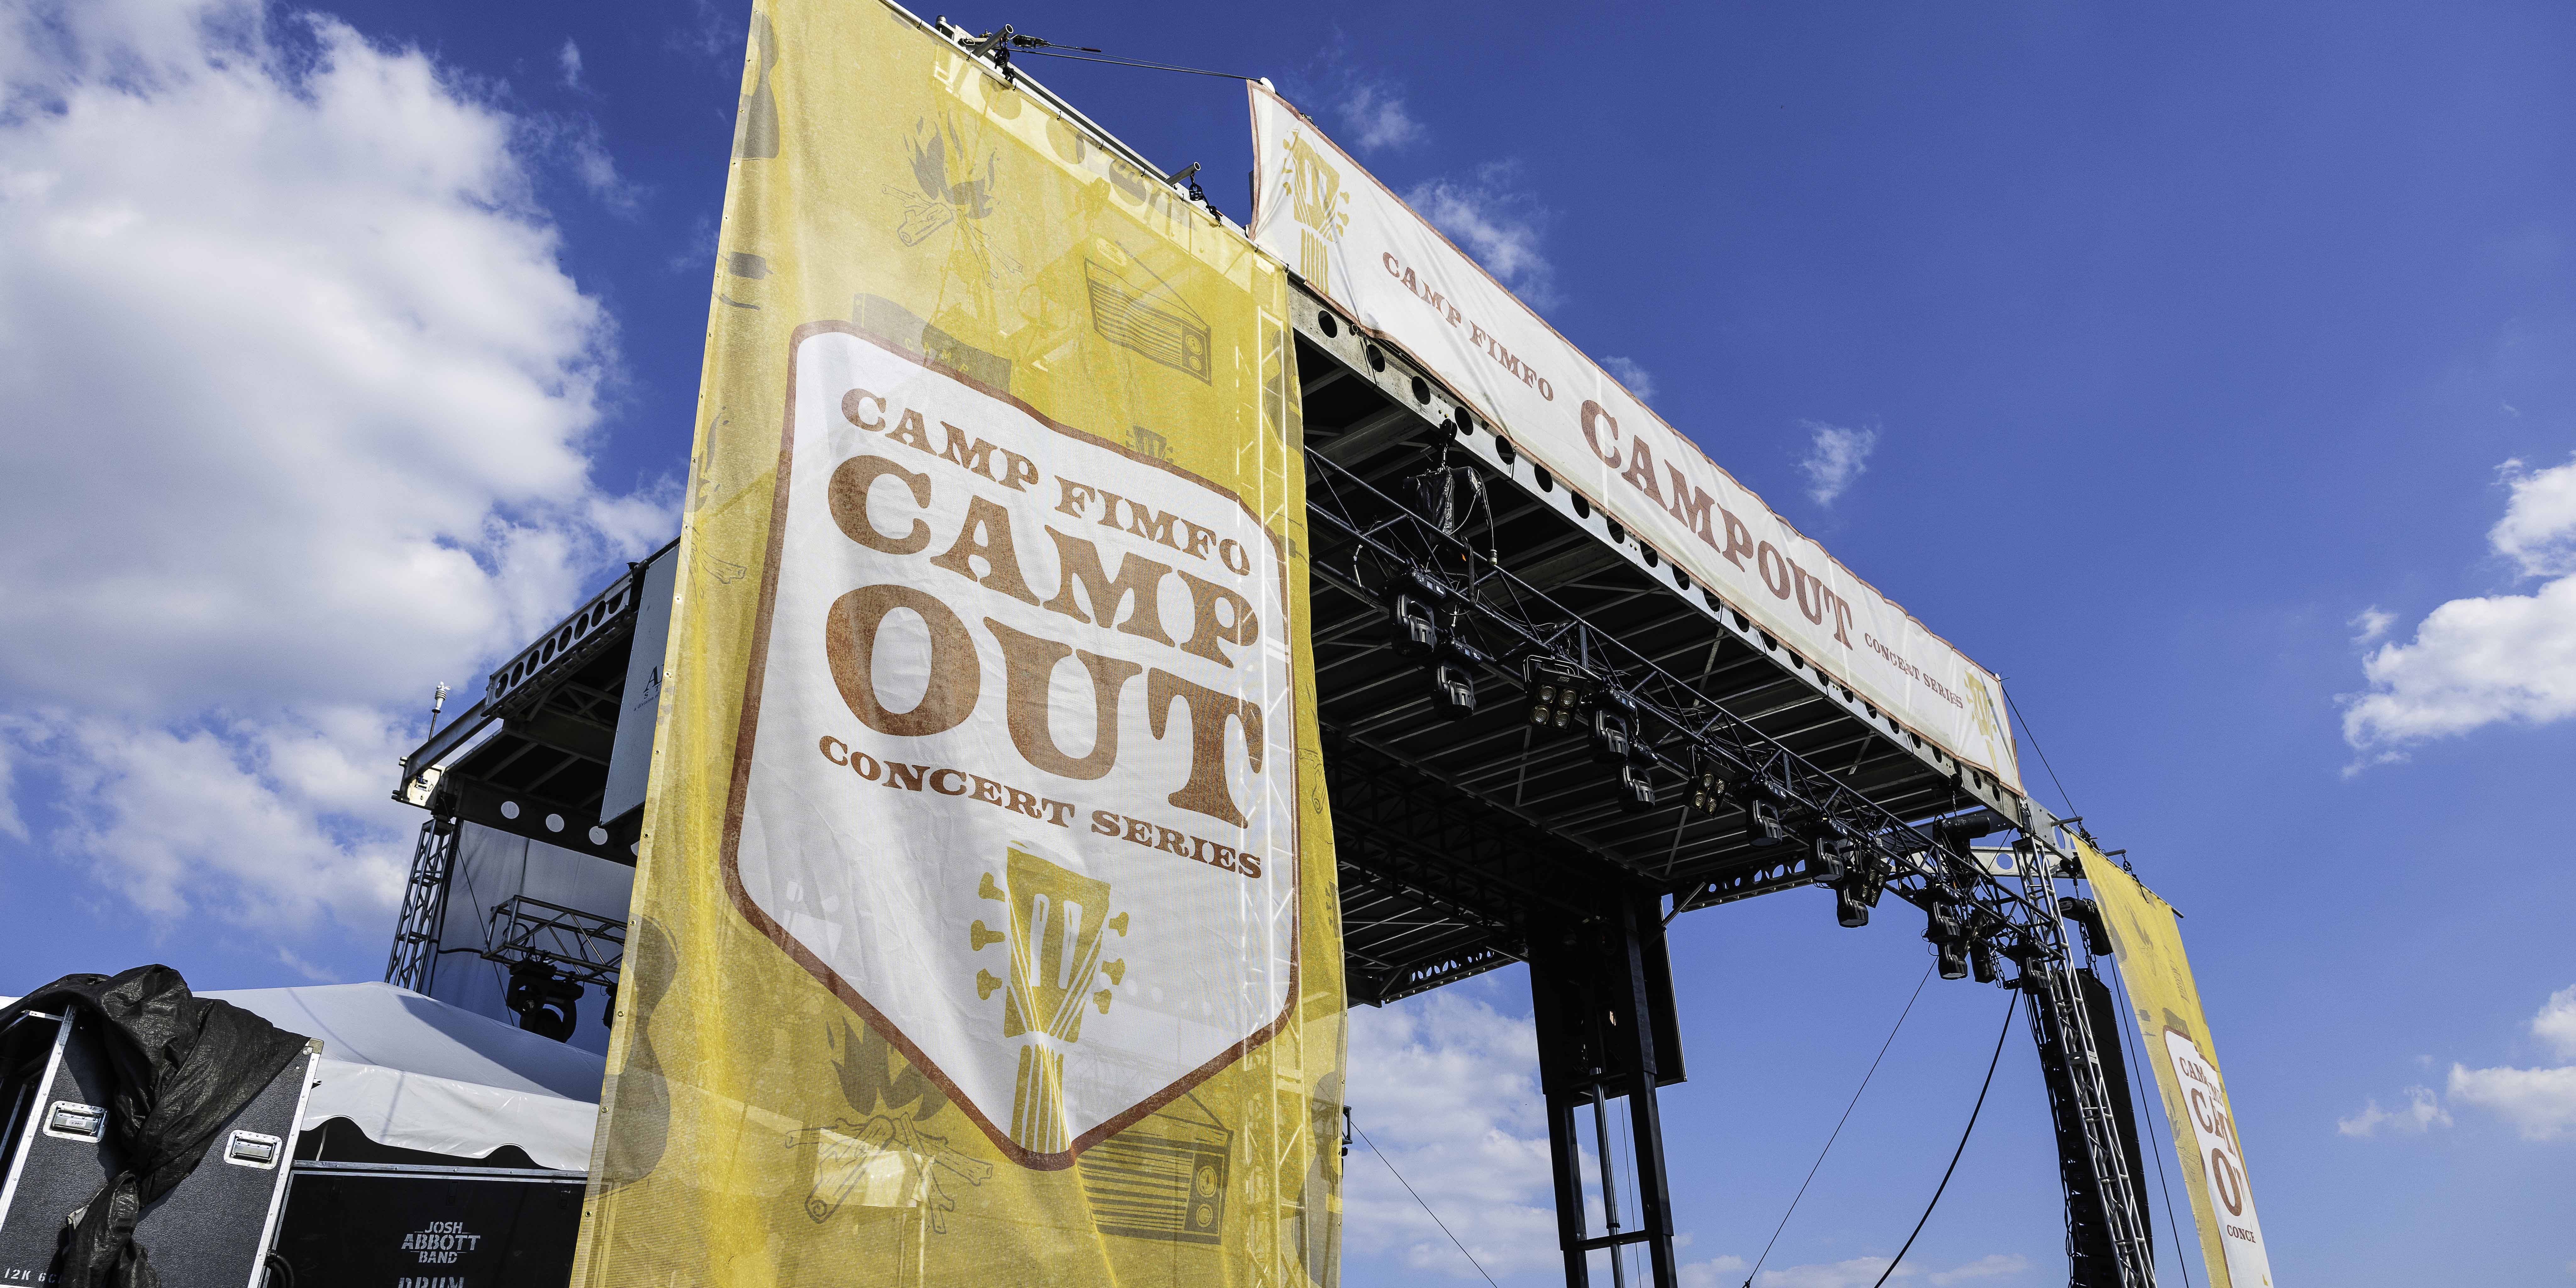 The stage at the Camp Fimfo Campout Concert Series in Waco, Texas